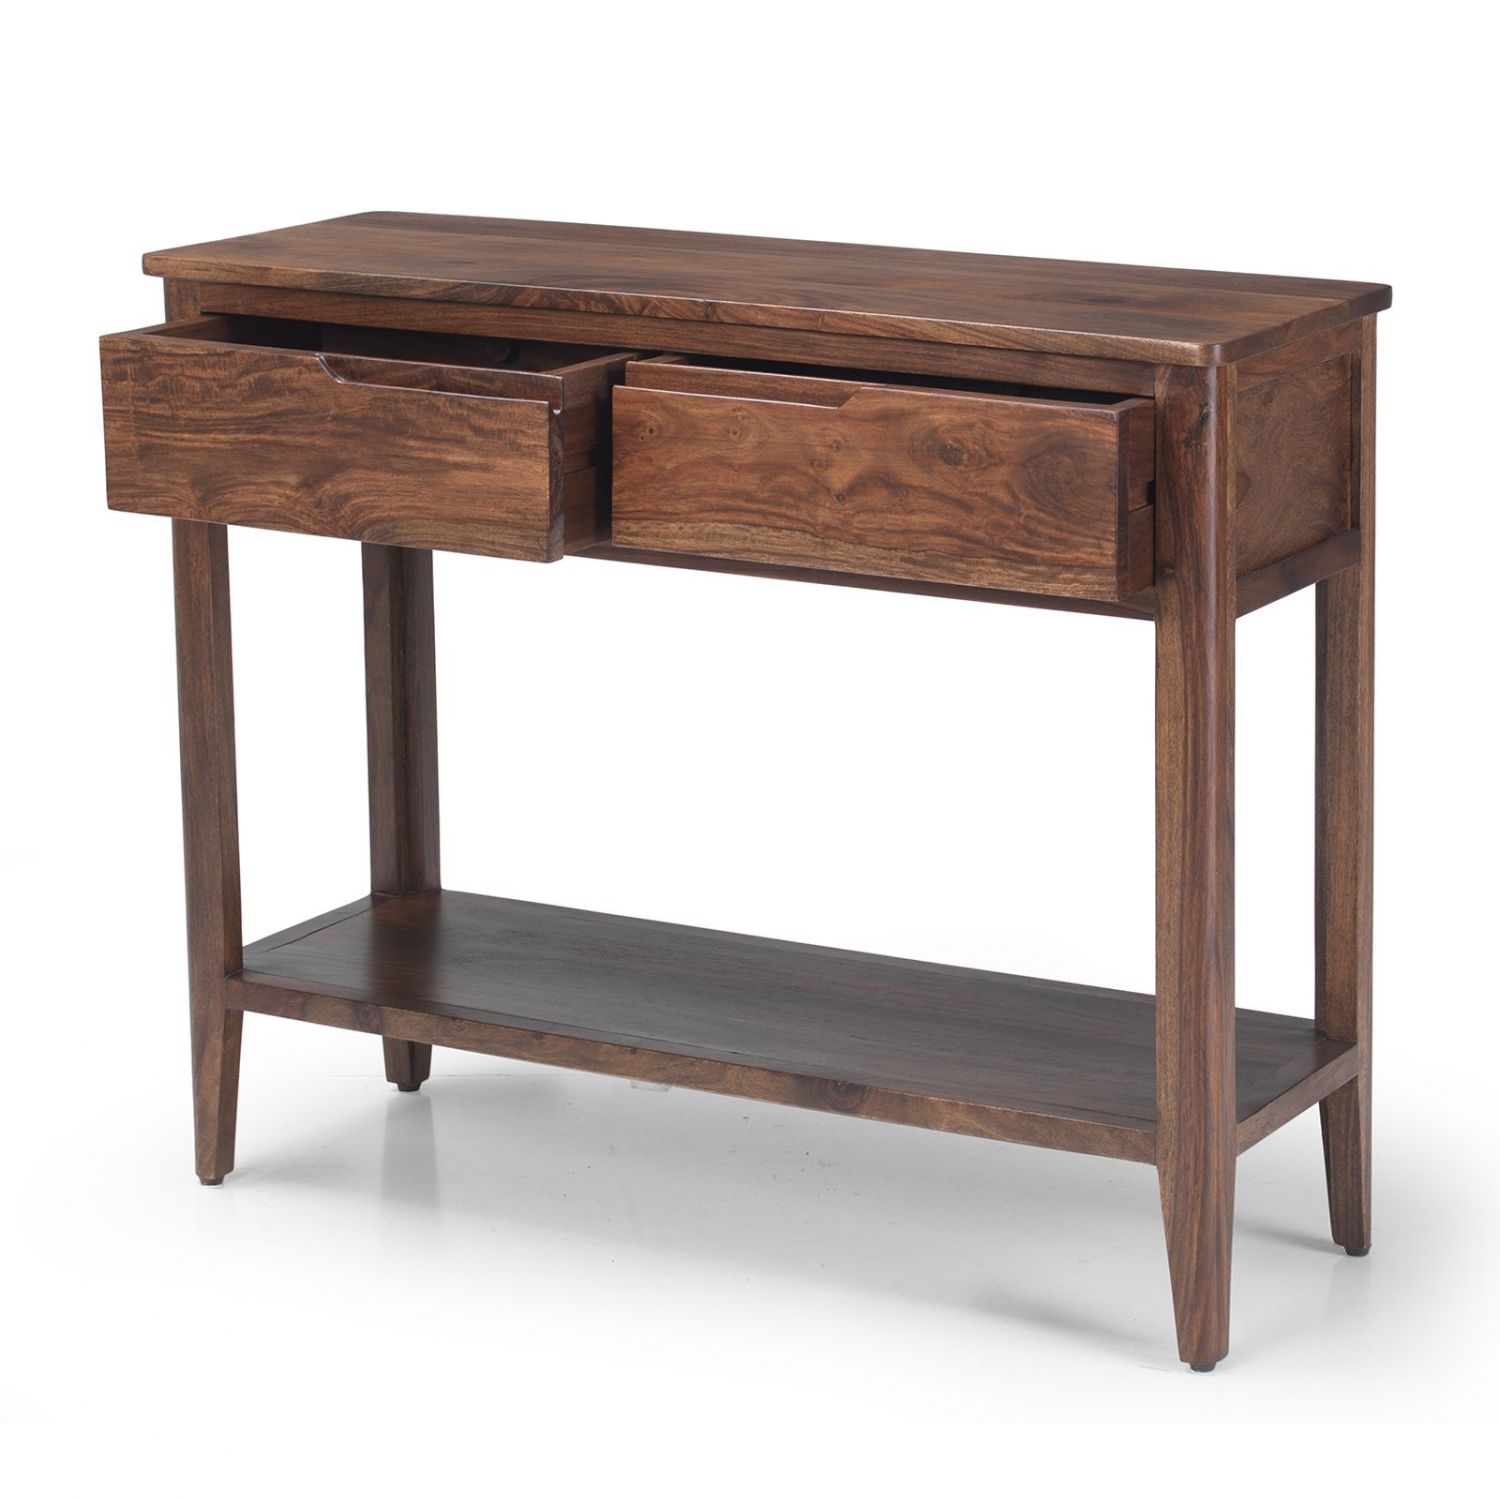 Padstow Walnut Dark Wood Furniture Console Hall Table With Regarding Rustic Walnut Wood Console Tables (View 2 of 20)